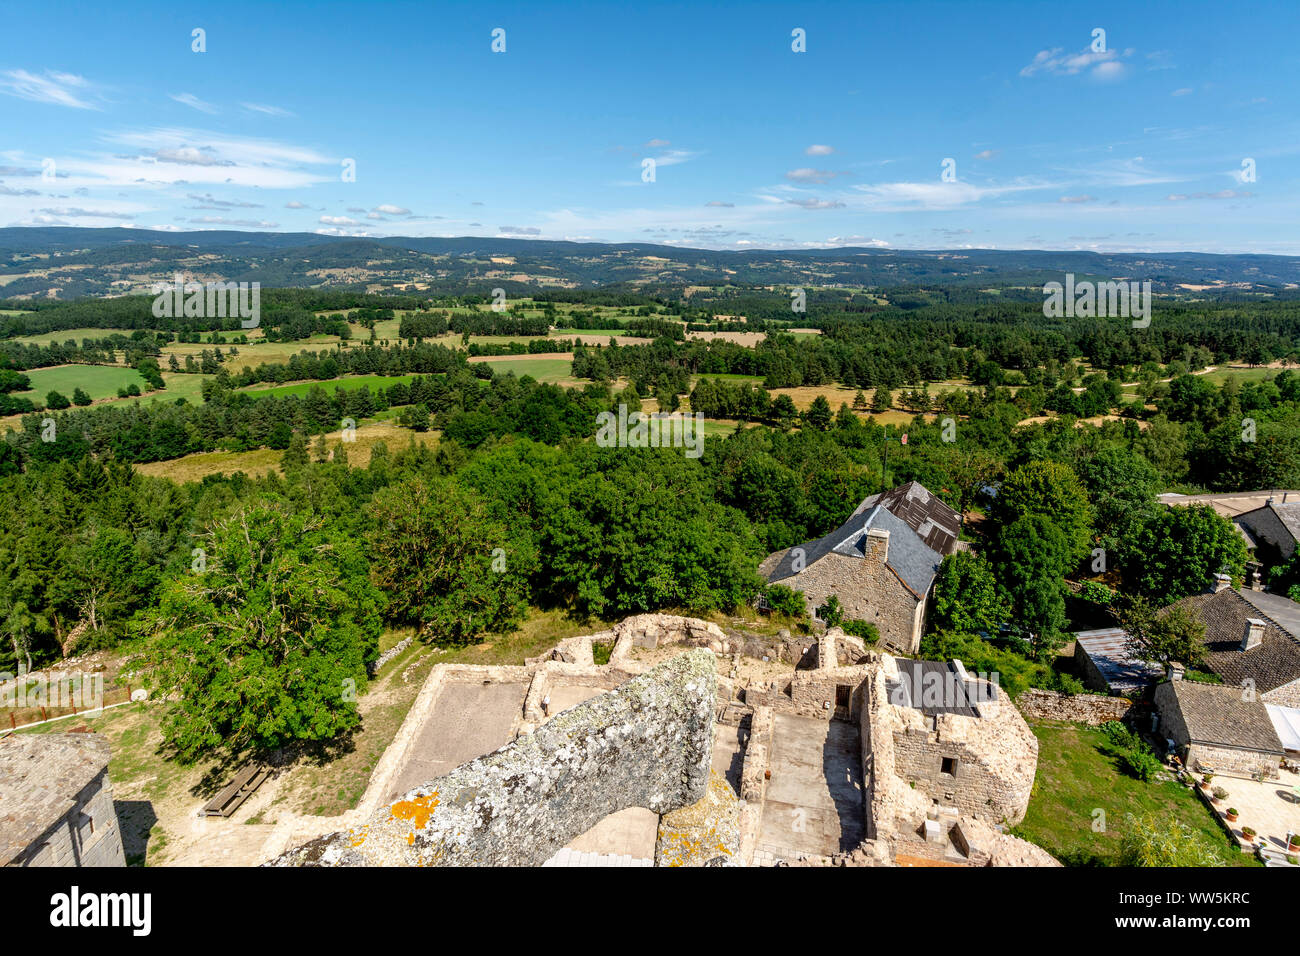 View on the Monts de la Margeride from the tower of castle d'Apcher, Prunieres, Lozere, Occitanie, France Stock Photo